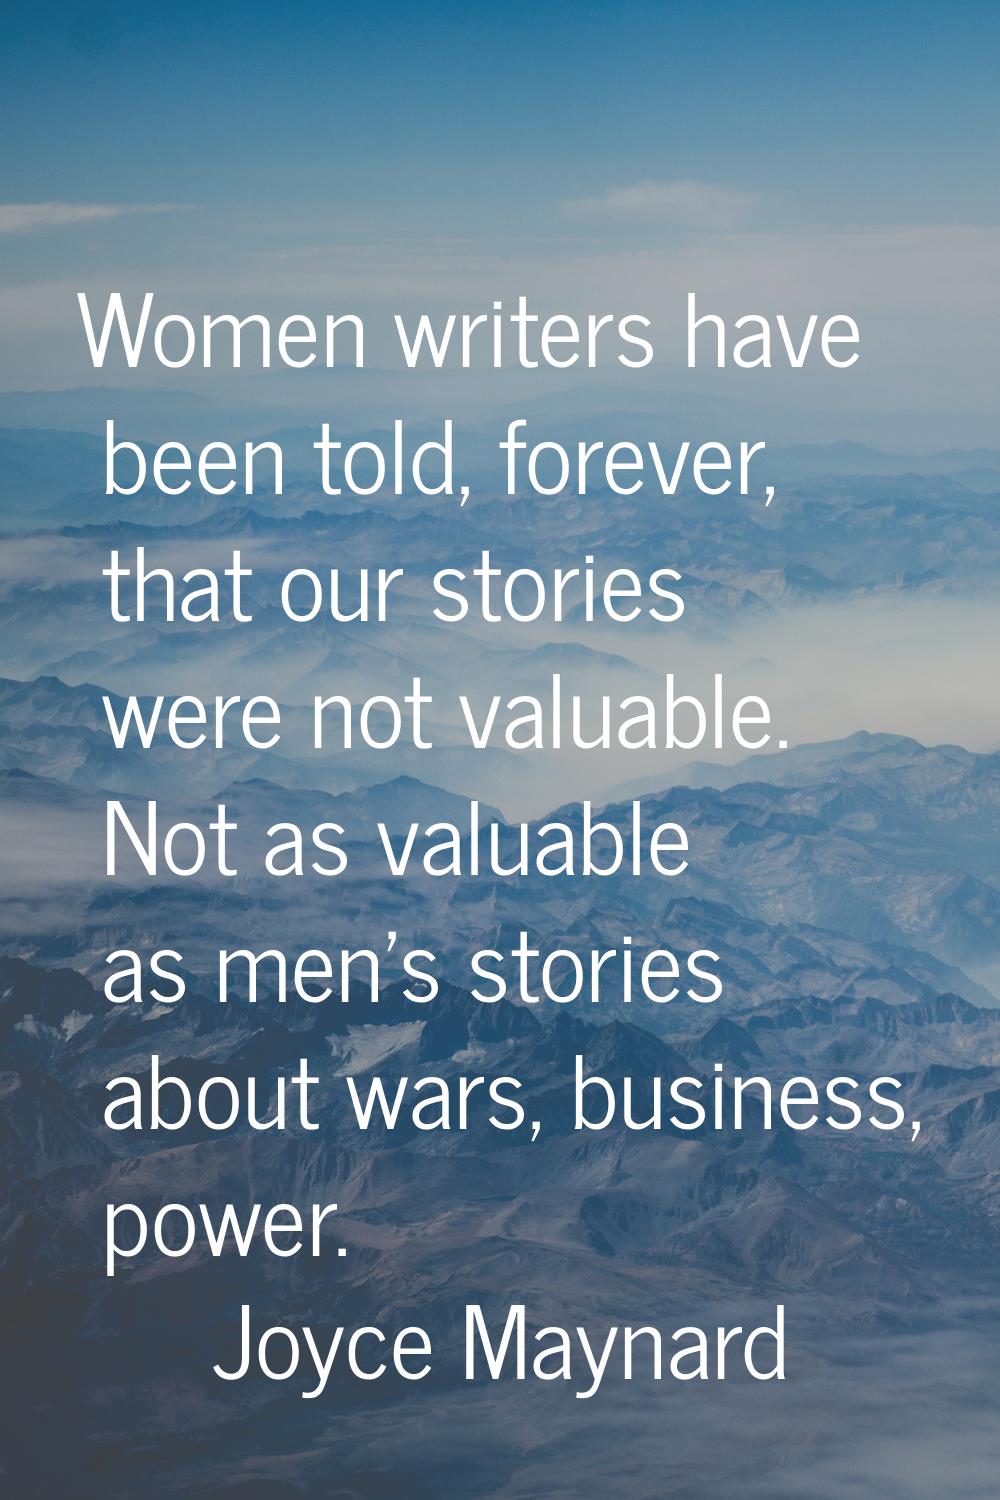 Women writers have been told, forever, that our stories were not valuable. Not as valuable as men's